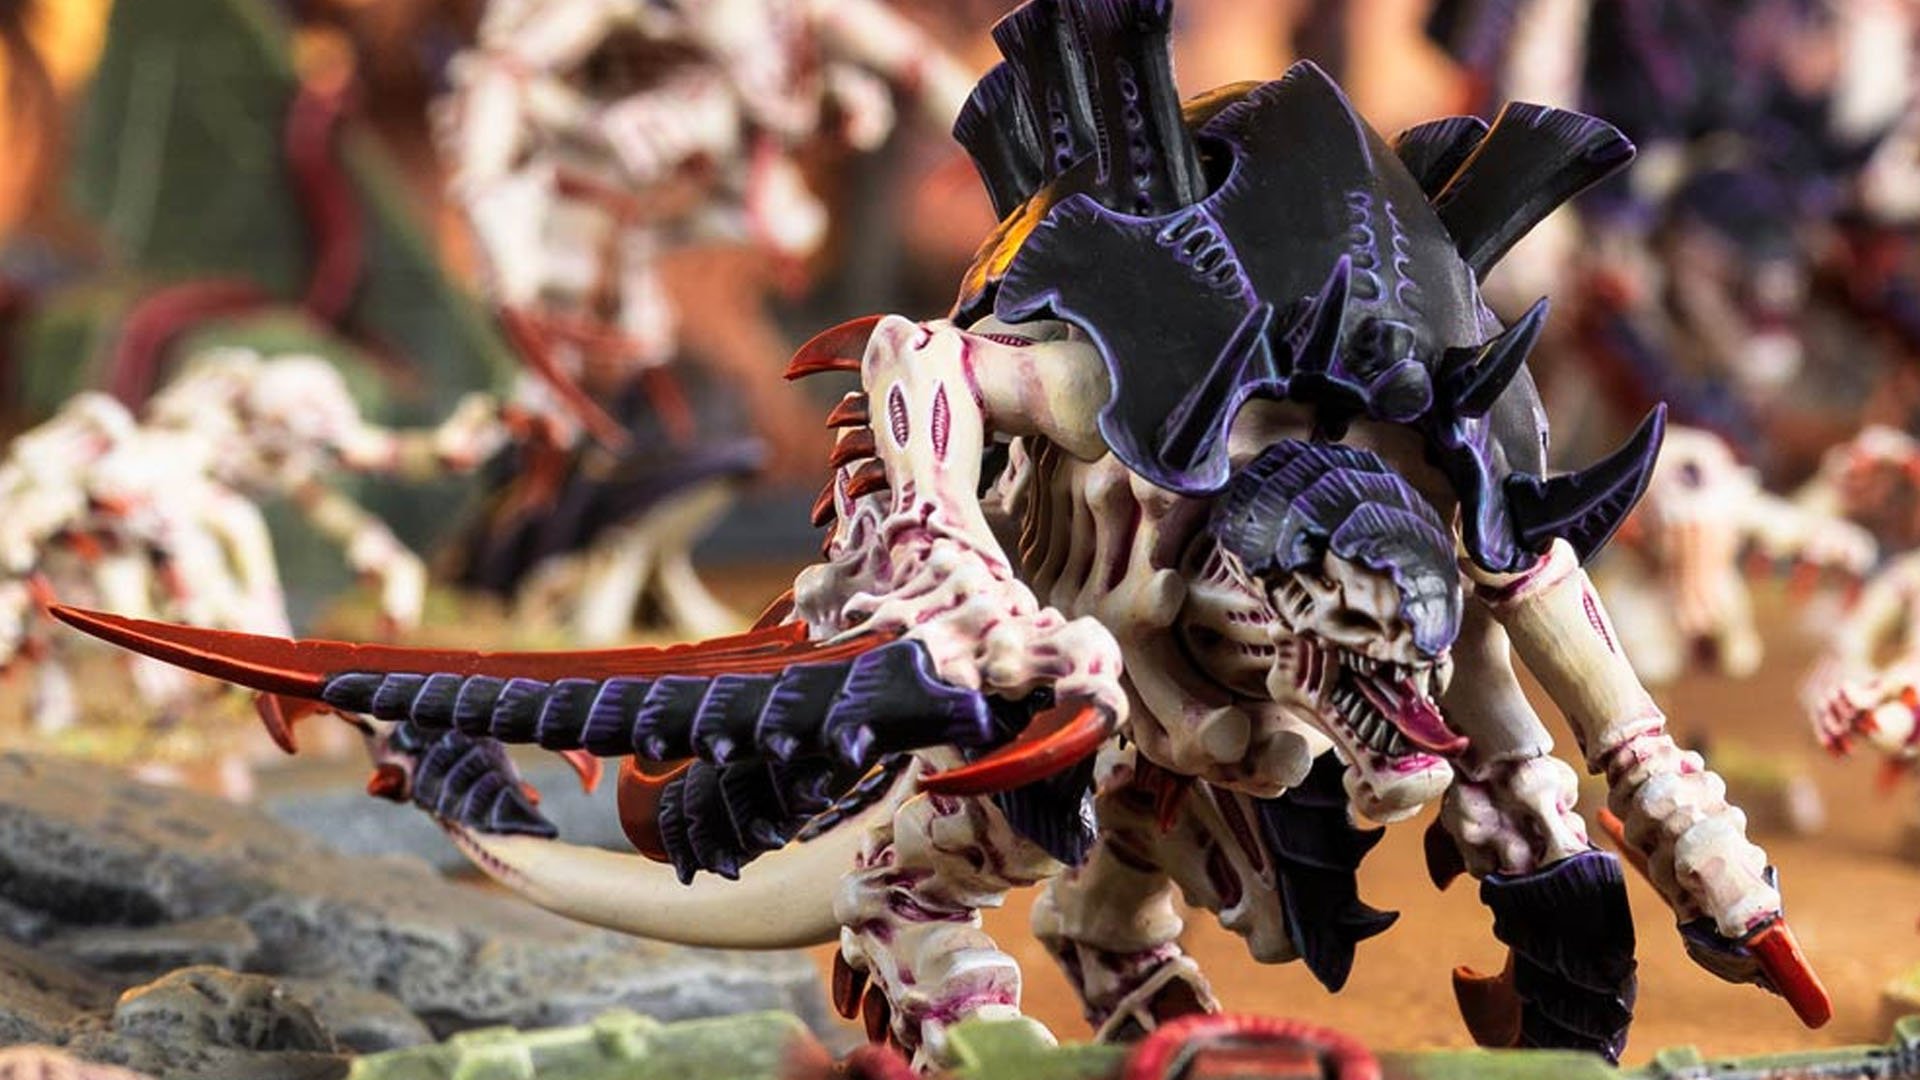 Warhammer 40k Tyranids - a close-up shot of a painted Tyranid from Games Workshop